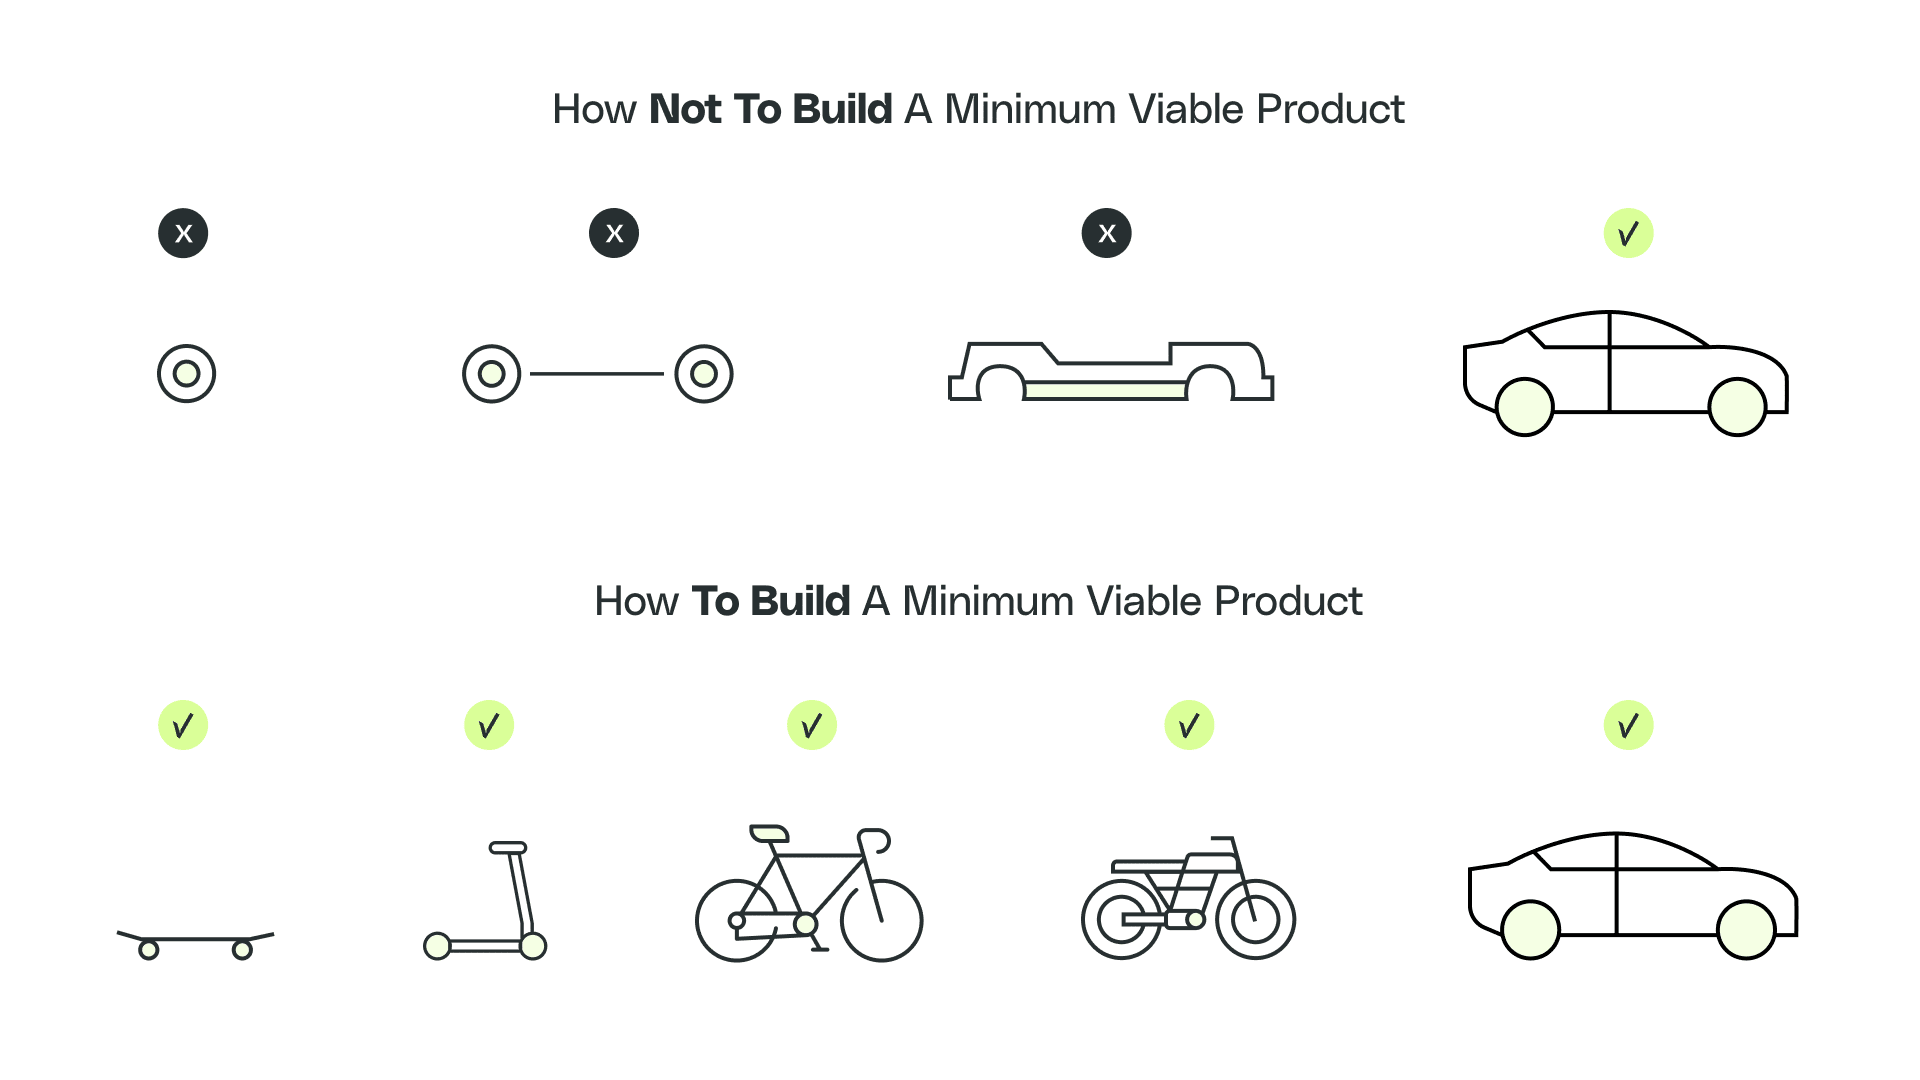 How to build a minimum viable product graphic